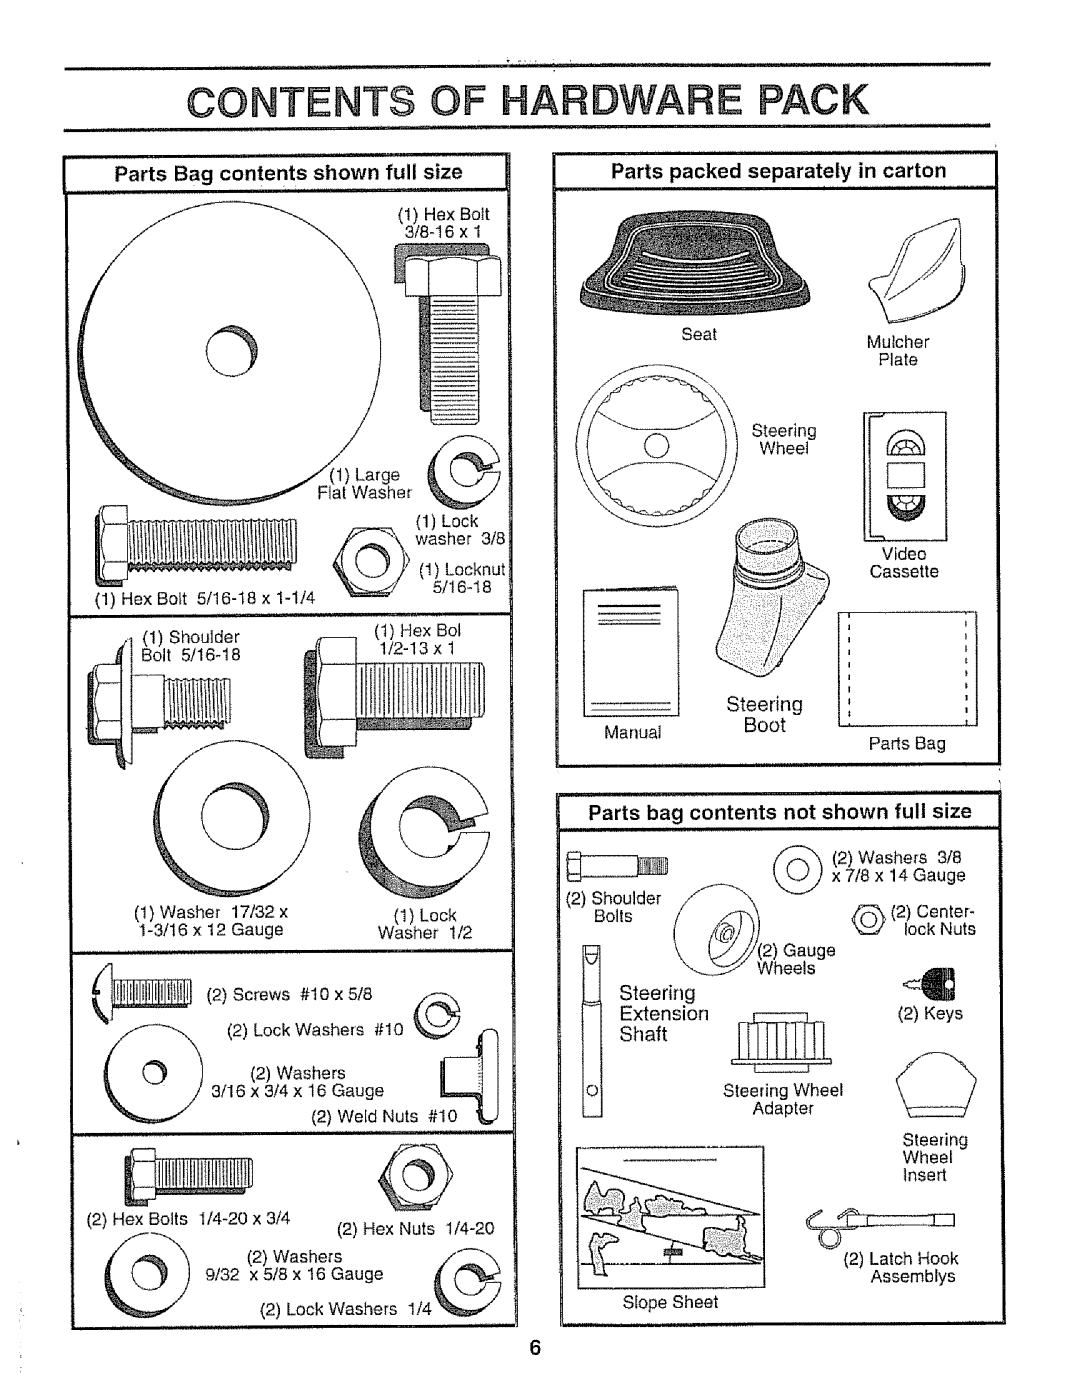 Sears 917.25953 Contents Of Hardware Pack, liiil!l!t. liIJ, Bag contents, shown, full size, Parts packed separately 